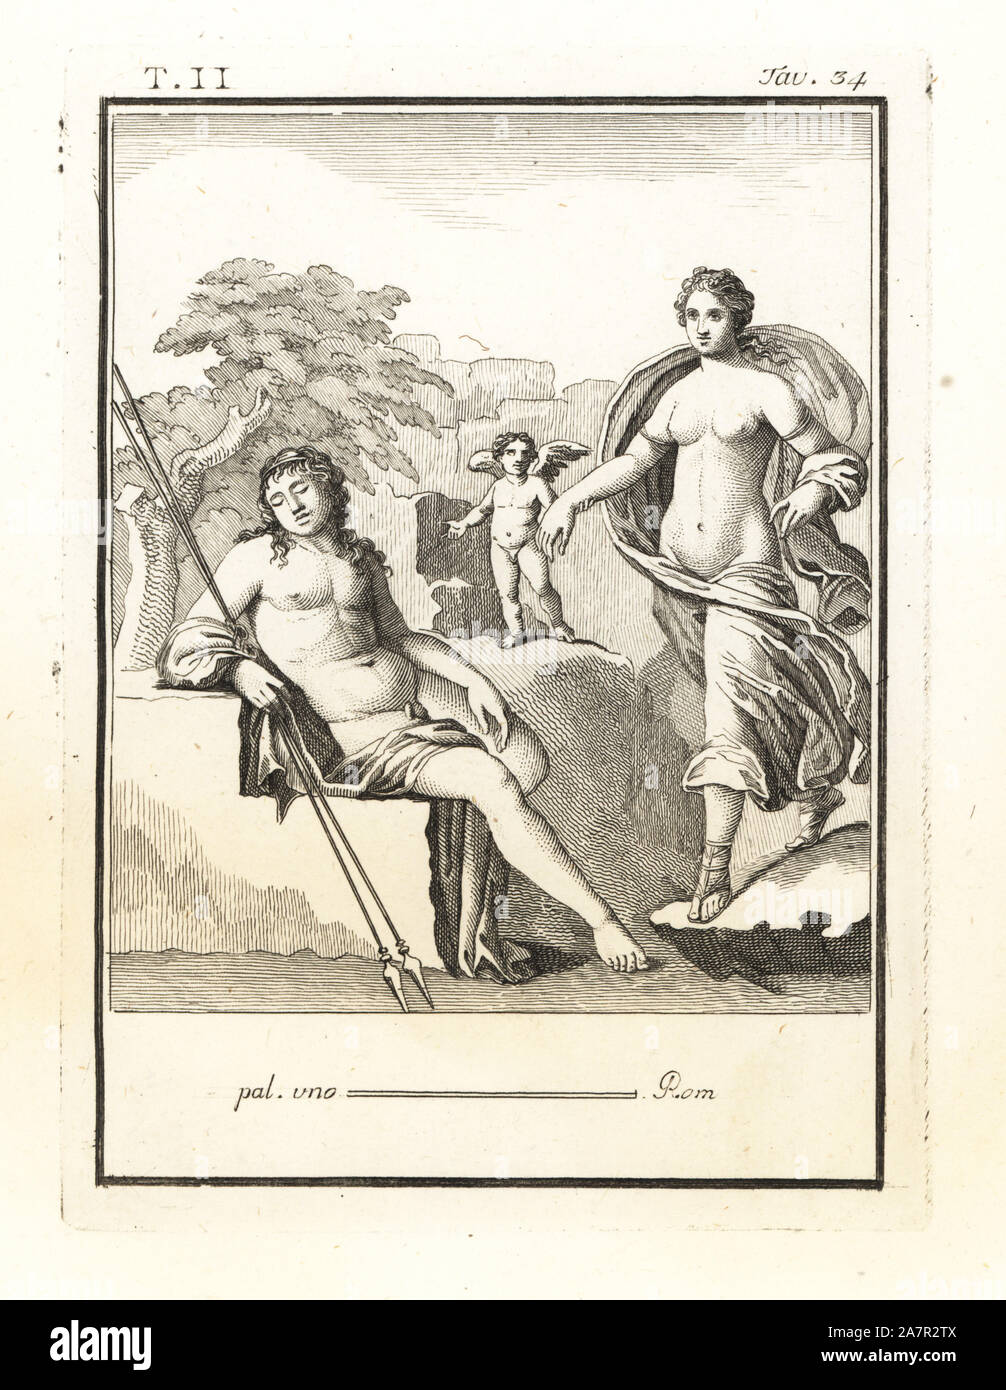 Diana, the moon goddess, led by Amore (cupid) to fall in love with the sleeping shepherd Endymion. Copperplate engraving by Tommaso Piroli from his Antiquities of Herculaneum (Antichita di Ercolano), Rome, 1789. Stock Photo